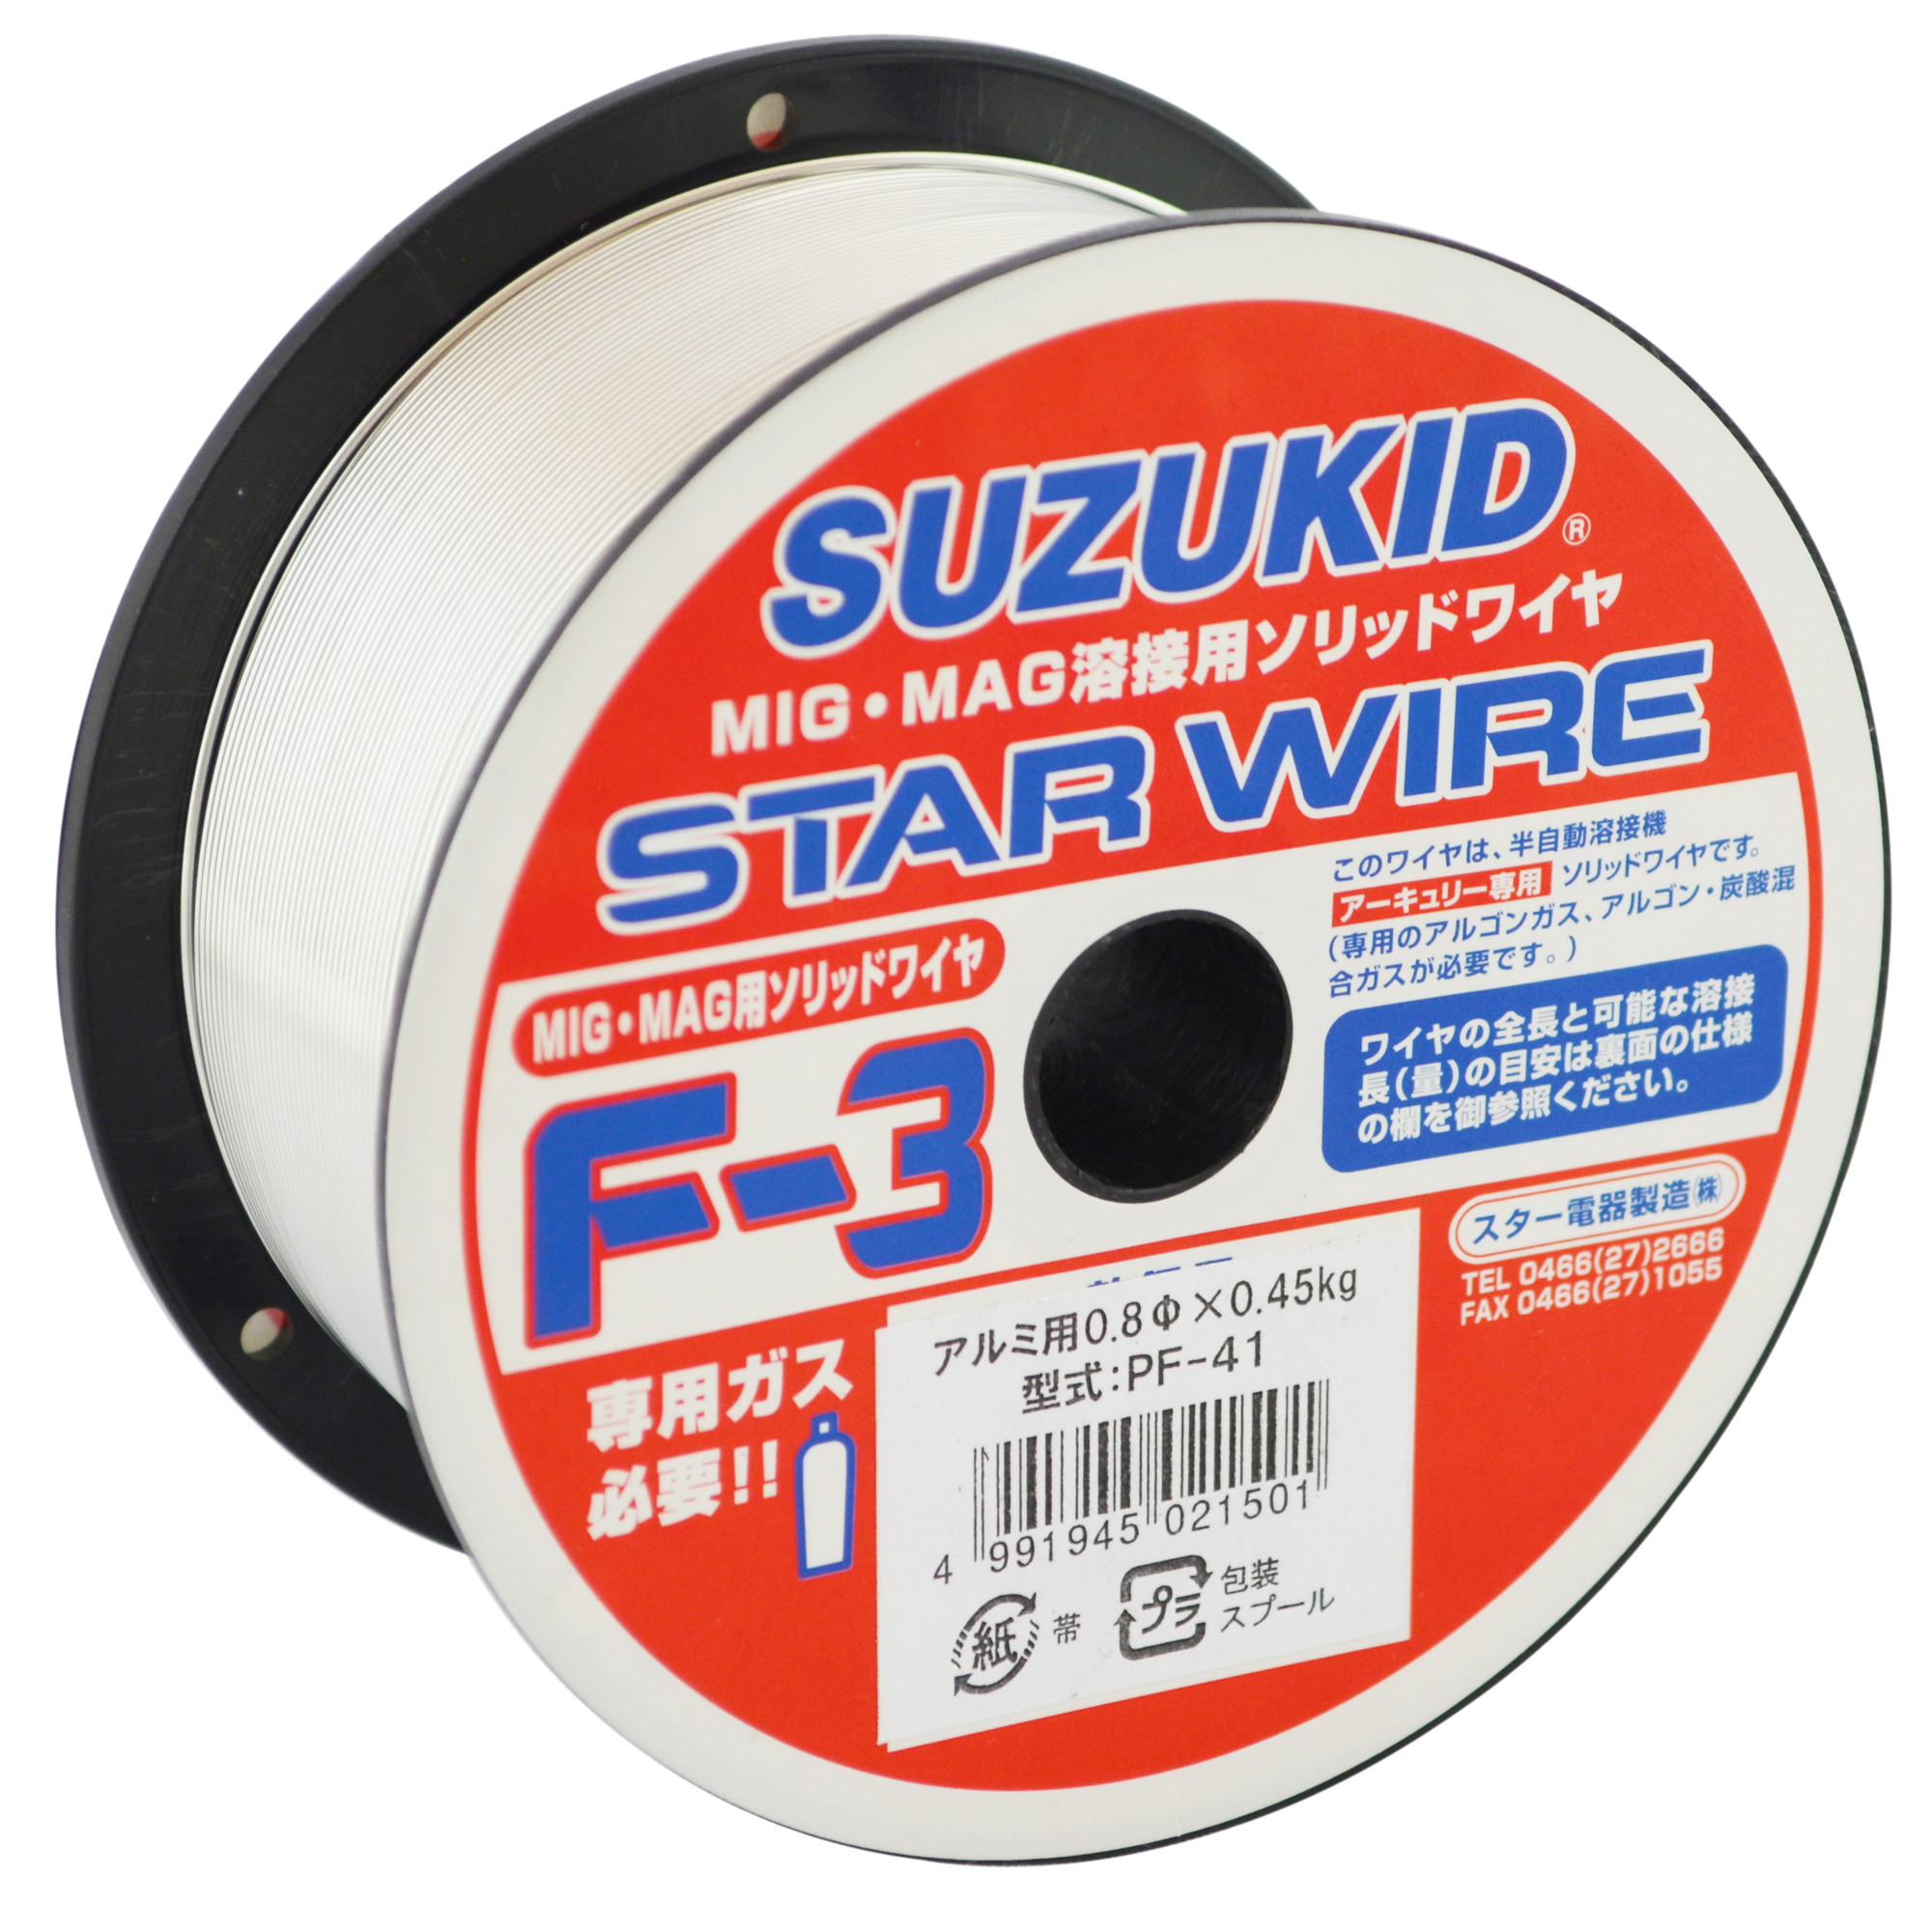 Star Wire, F-3, for Solid Wire Aluminum 0.8φ X 0.45 kg